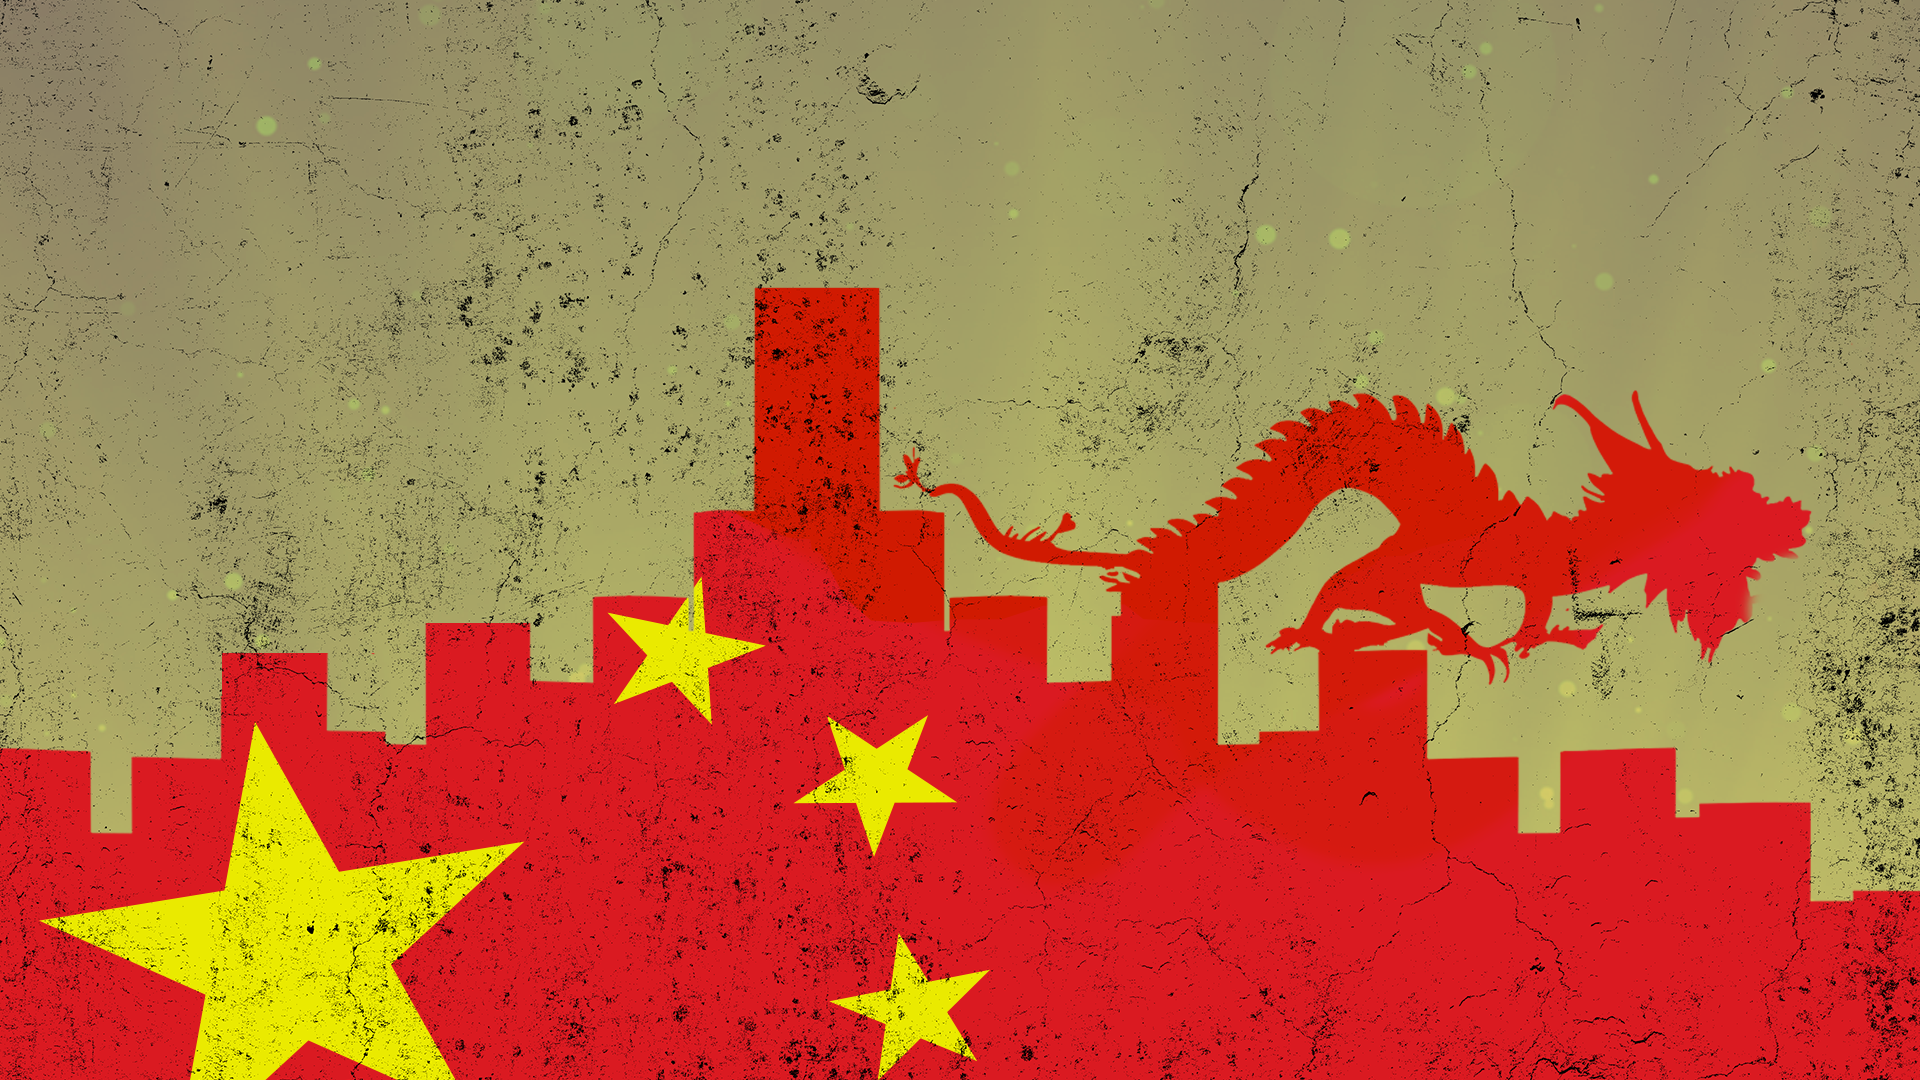 What does China’s economic downturn mean for its trade relations, its diplomatic leverage and its overseas development? : Michael Joiner, 360info CC-BY-4.0